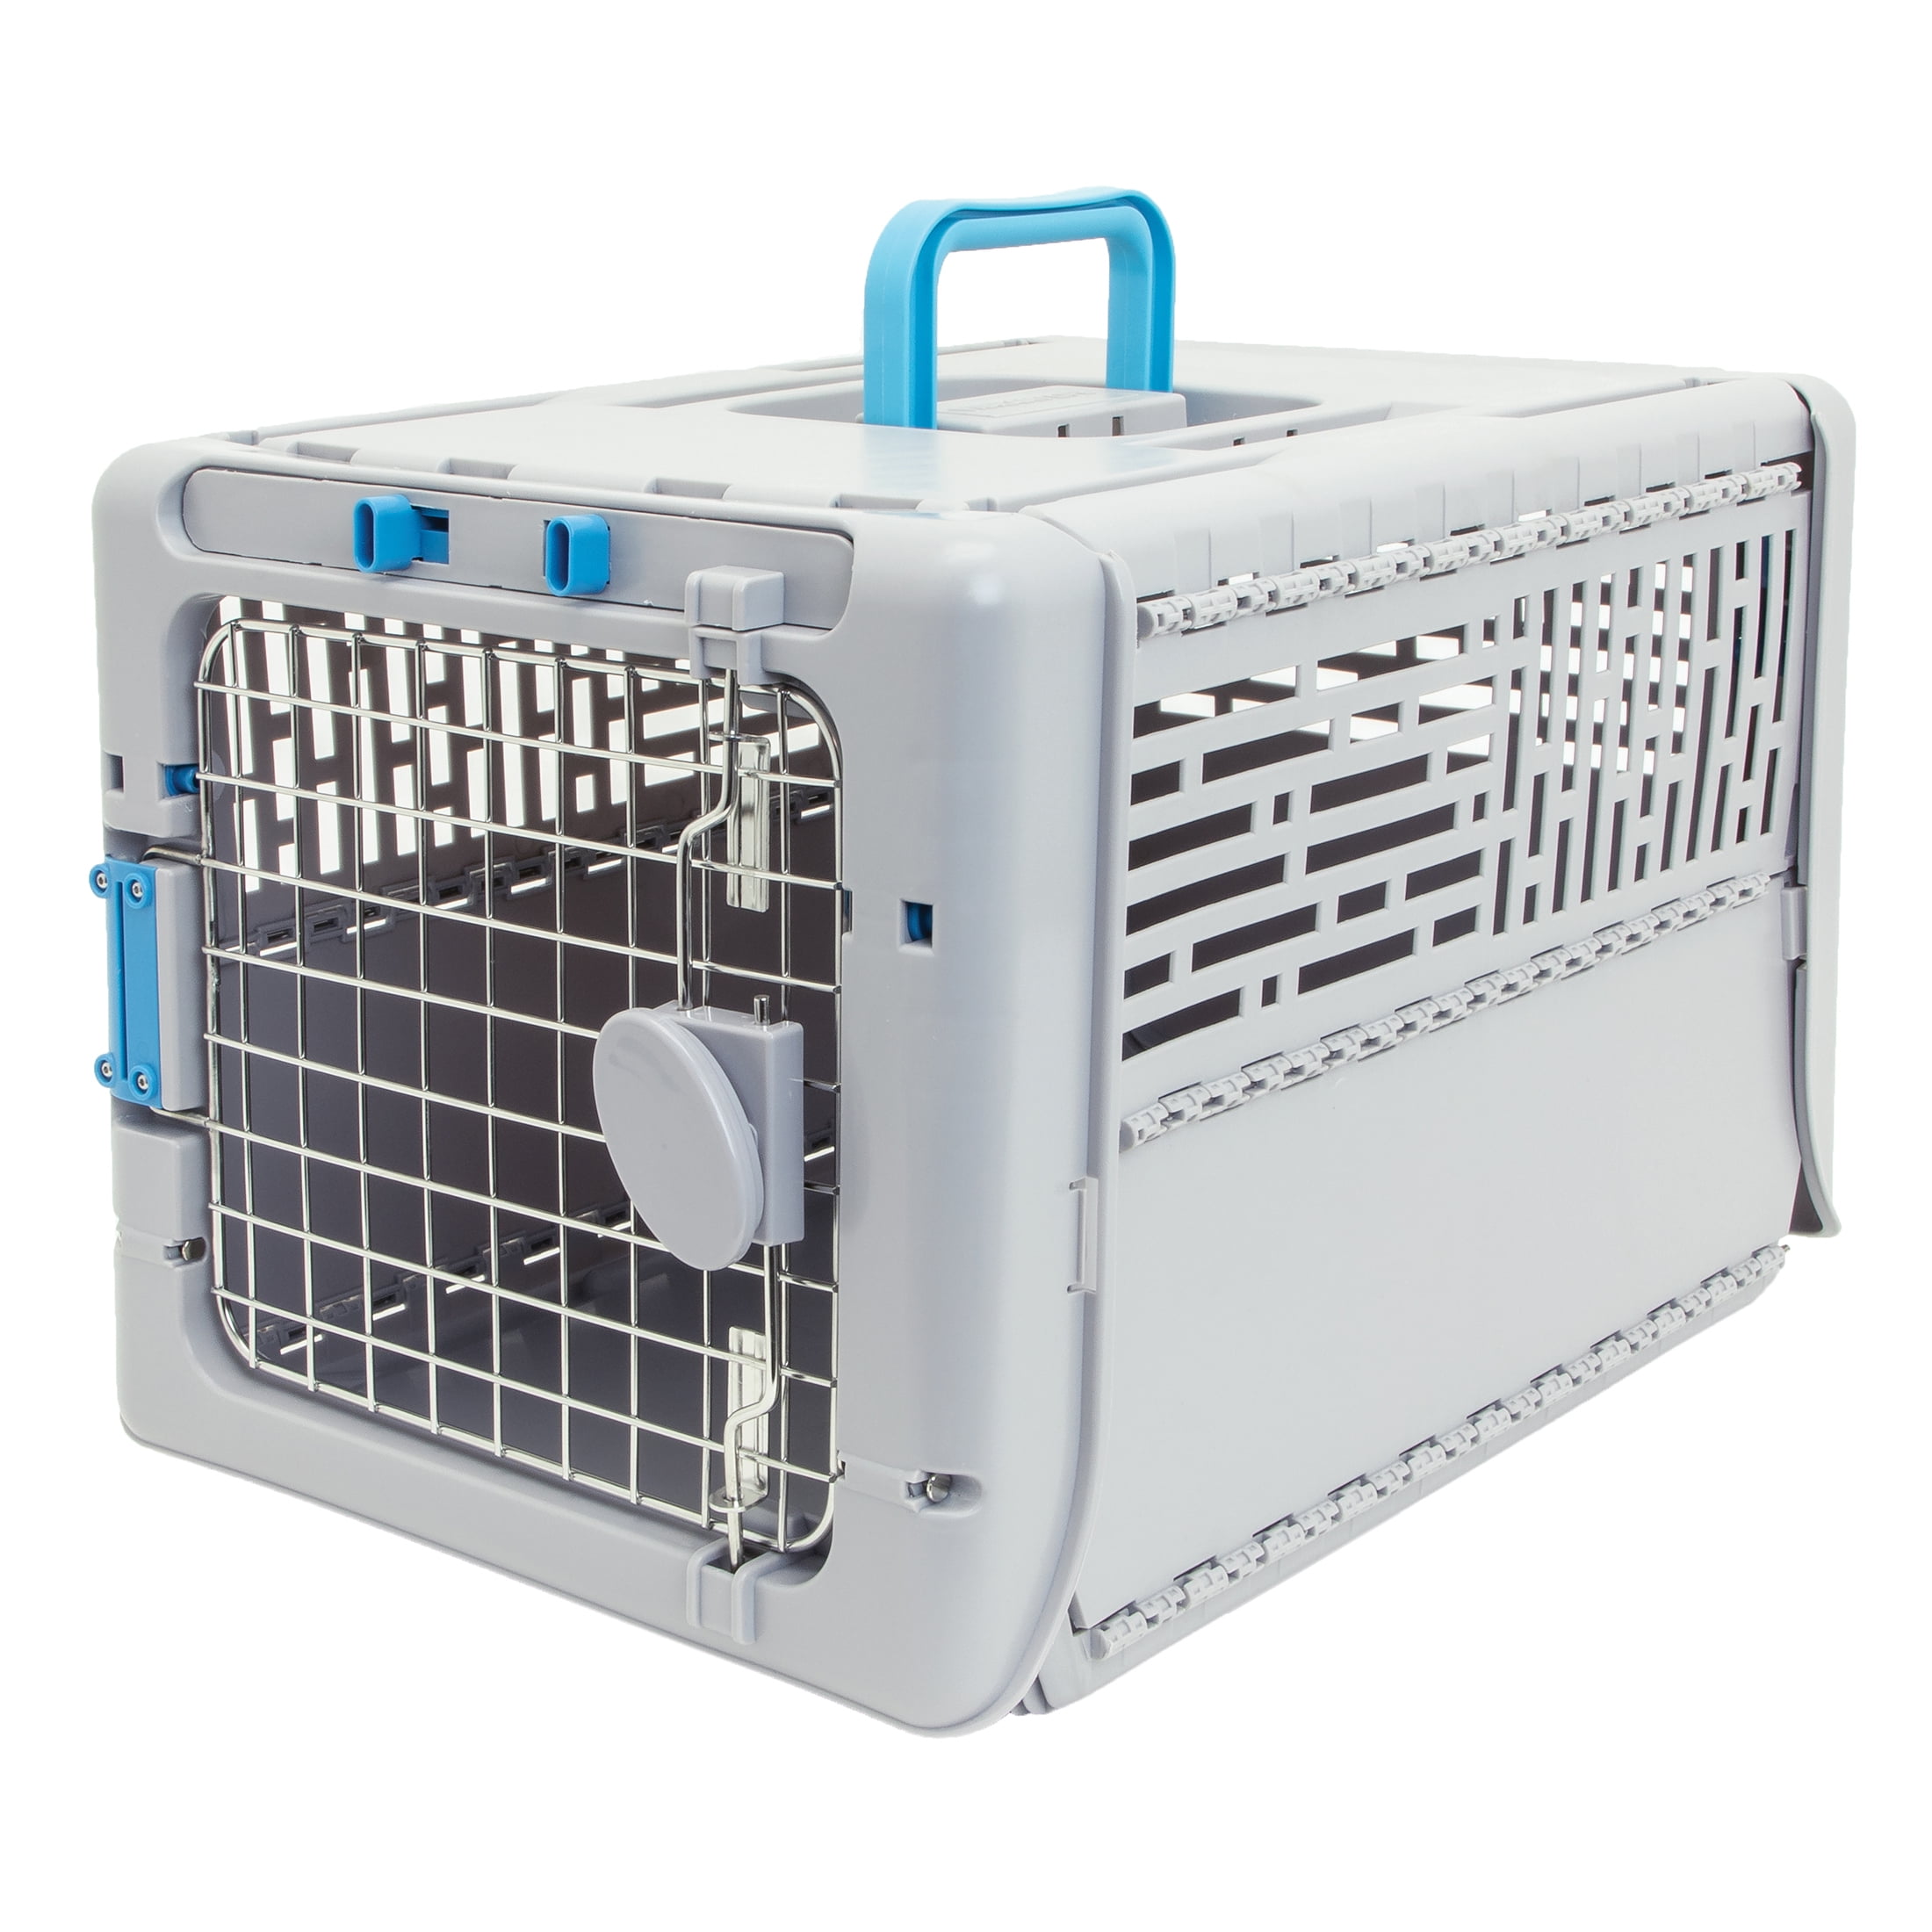 SportPet Small 19 Collapsible Plastic Pet Kennel, Pet Carrier, Dog, Cat,  Small Animal